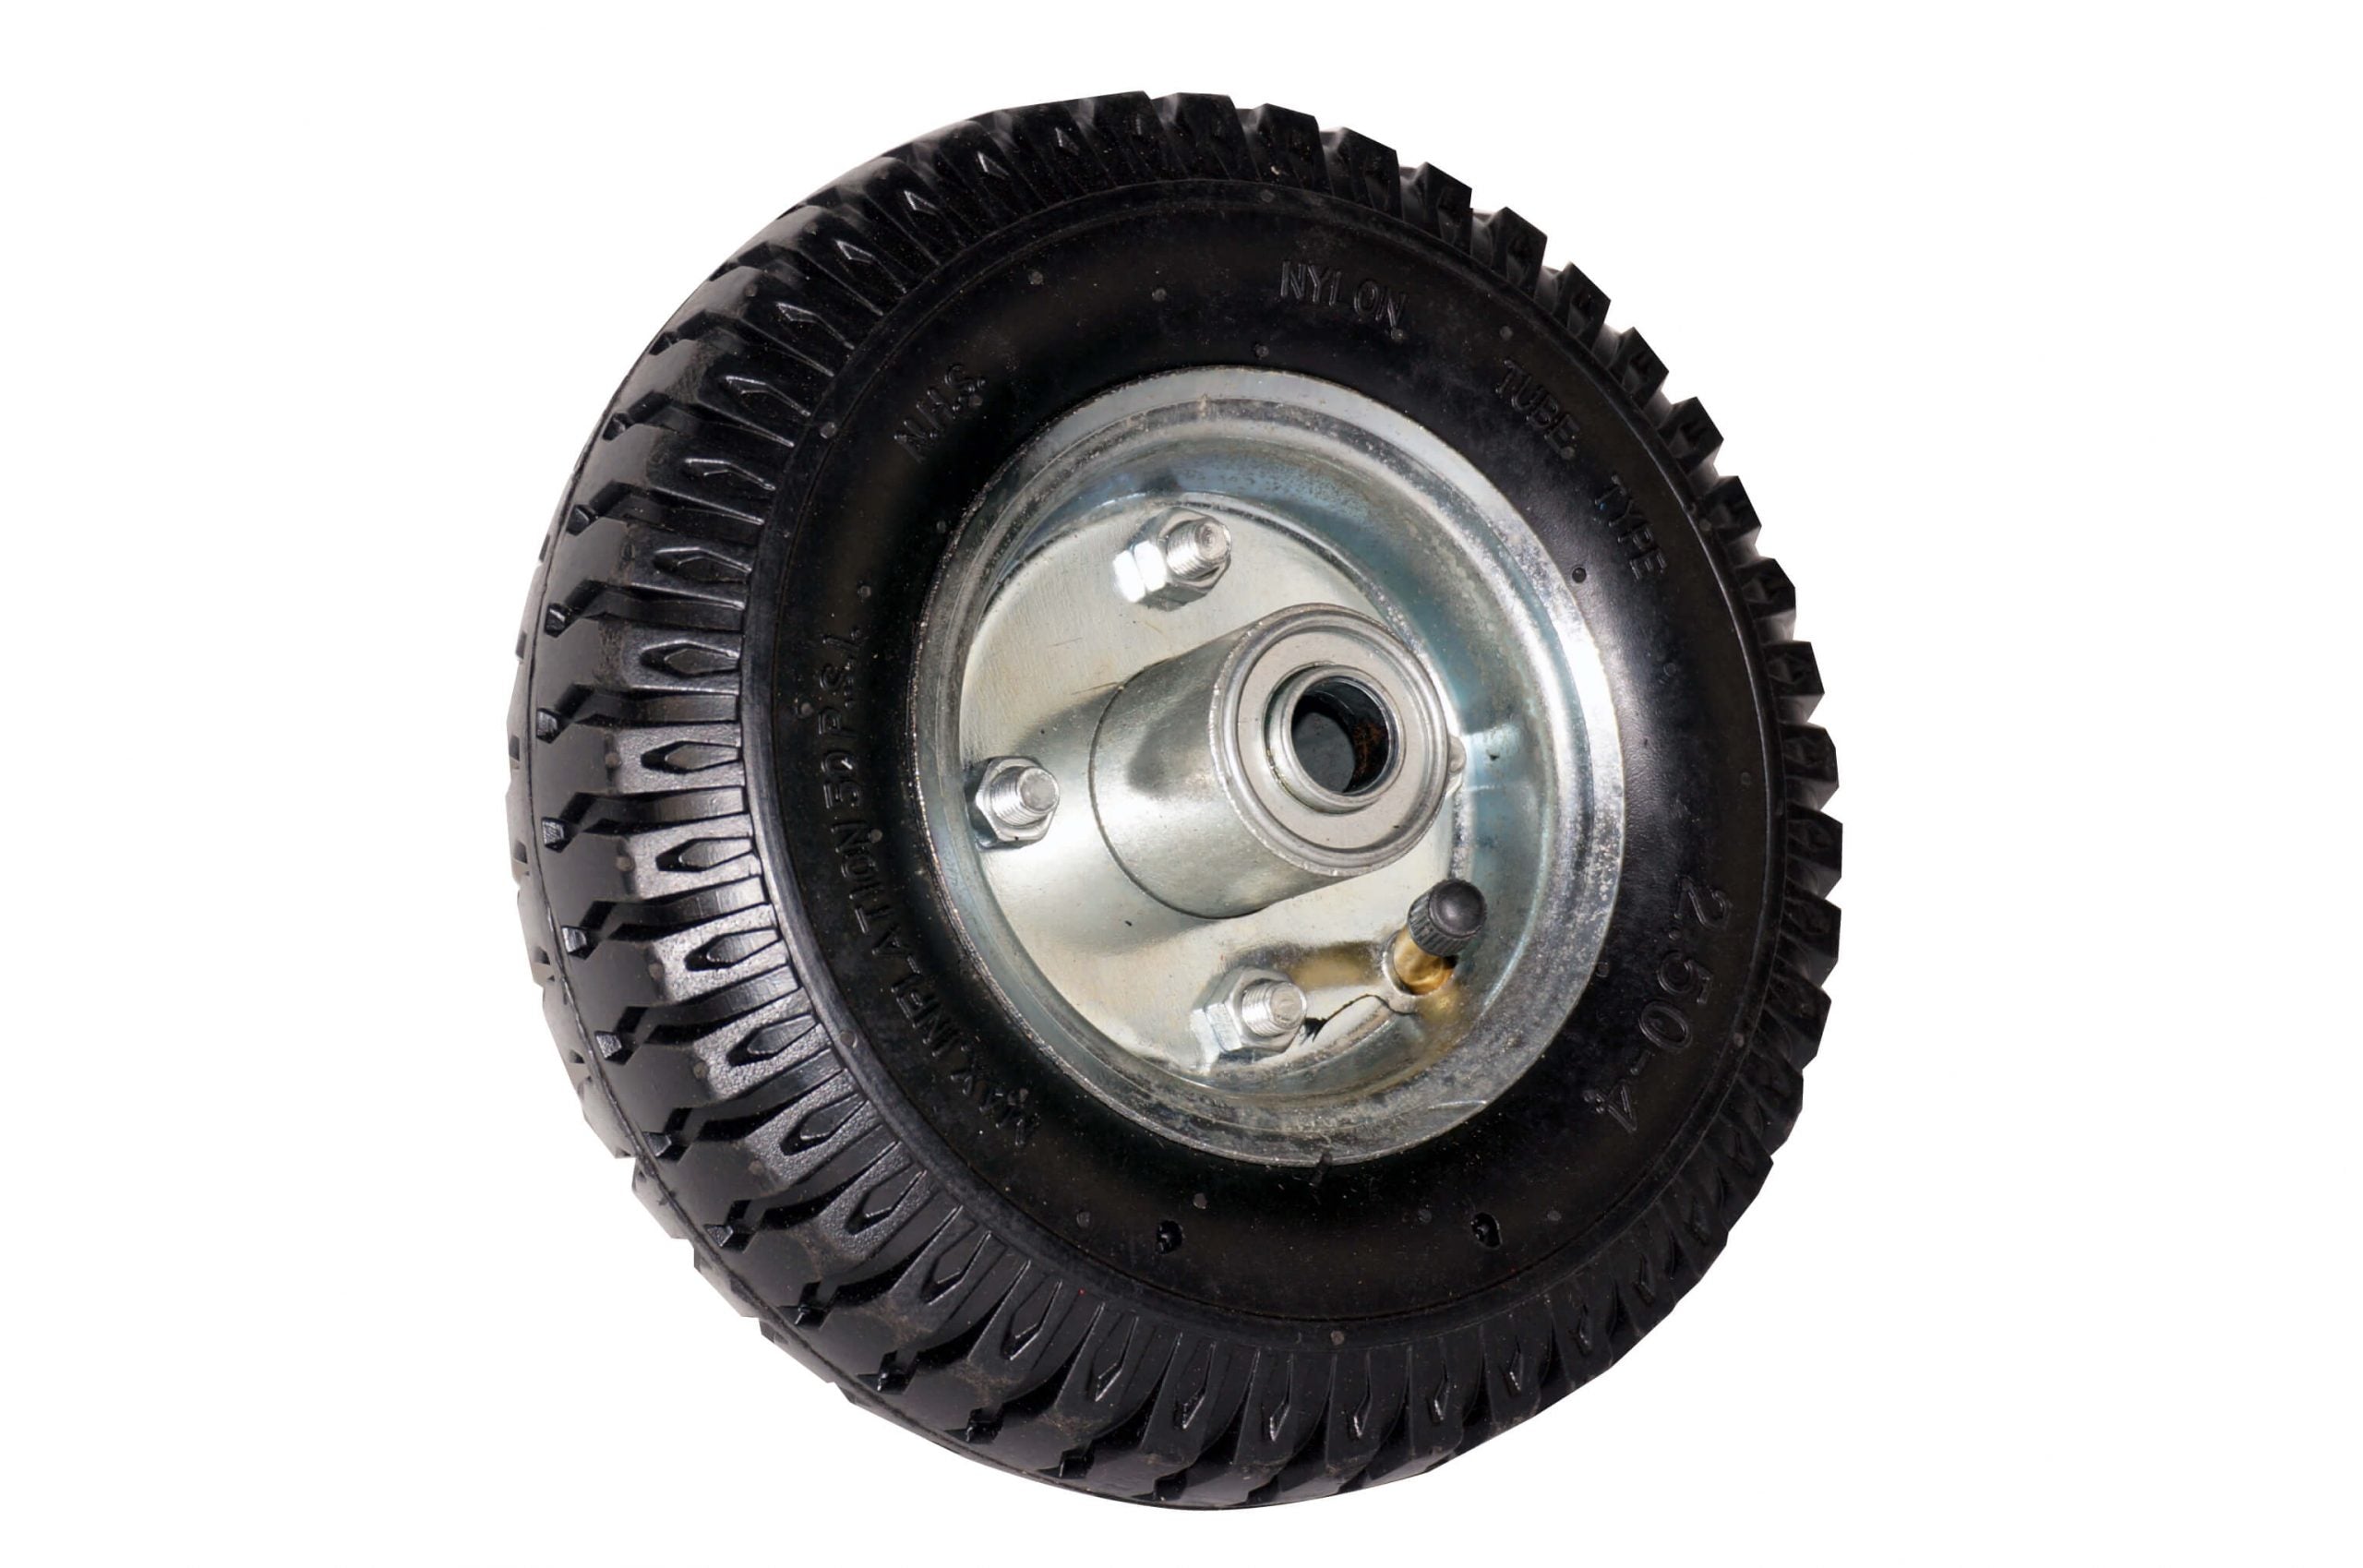 Replacement Wheel For Moose Or Hardline Training Wheels Includes 1X Tyre, Rim And Bearings